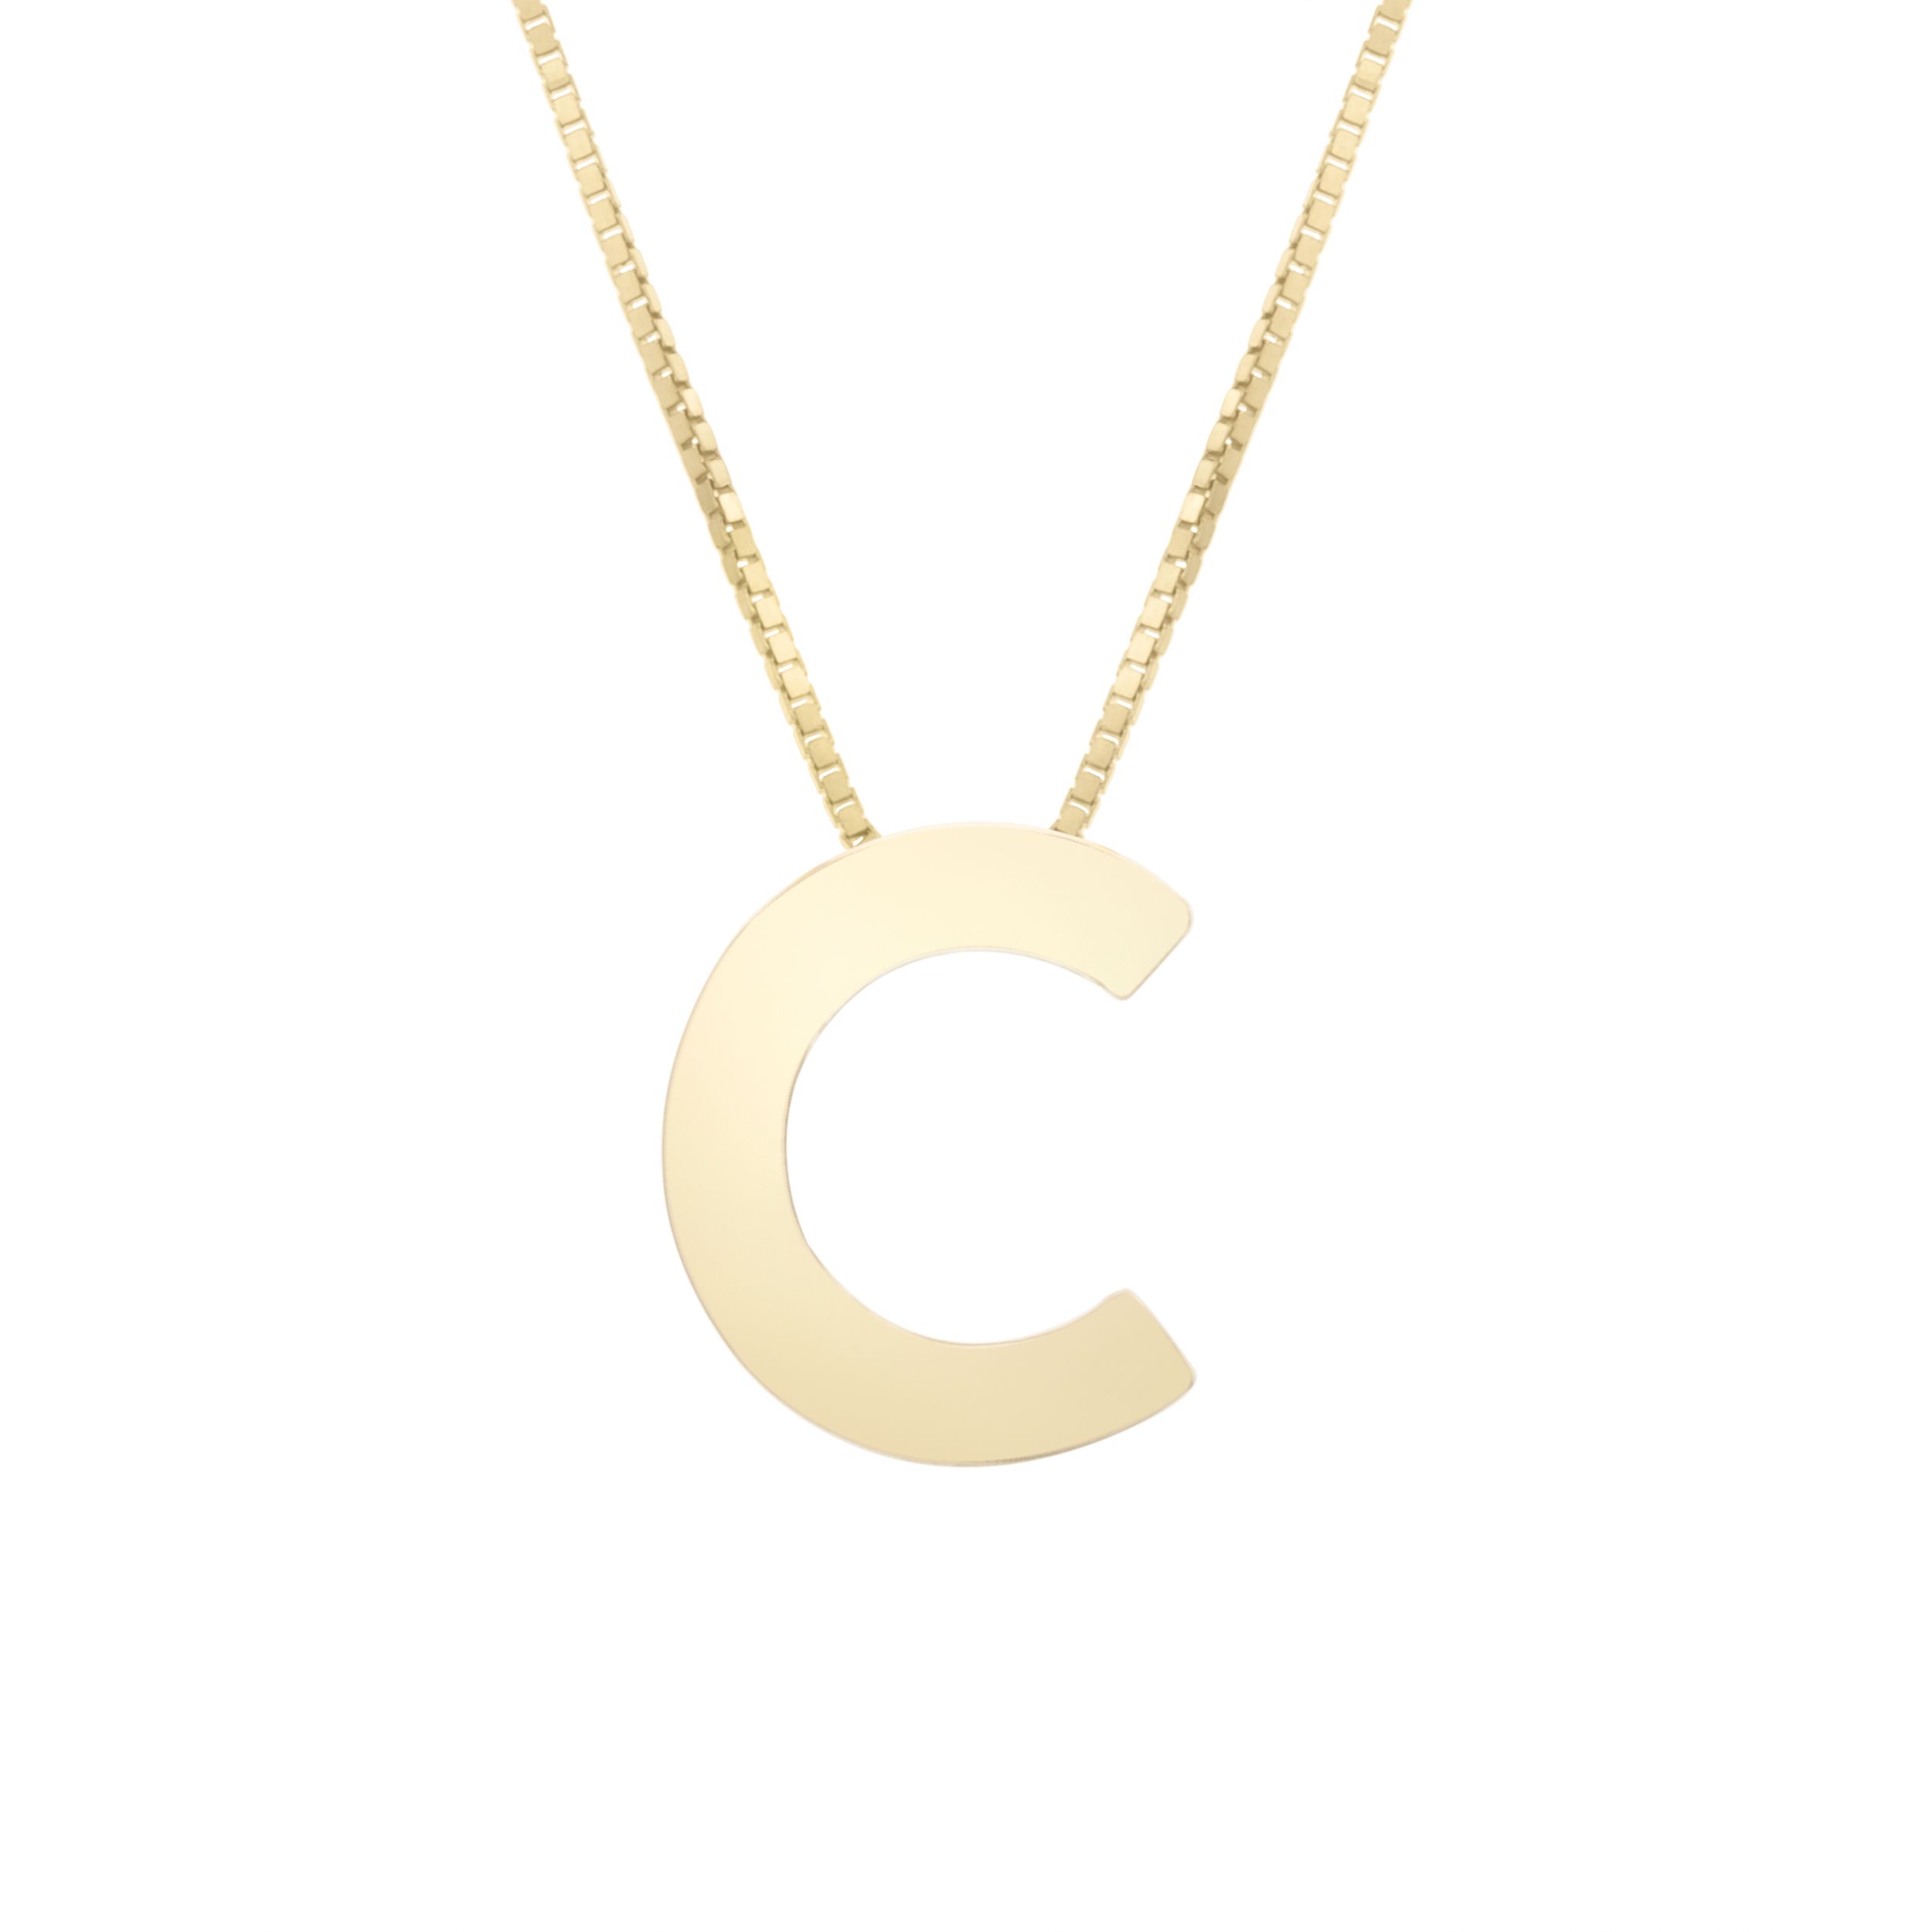 Sterling Silver 3 Stone Geniune Diamond 0.012ct Letter C Necklace Pendant  14 - 32 Inches | Jewellerybox.co.uk